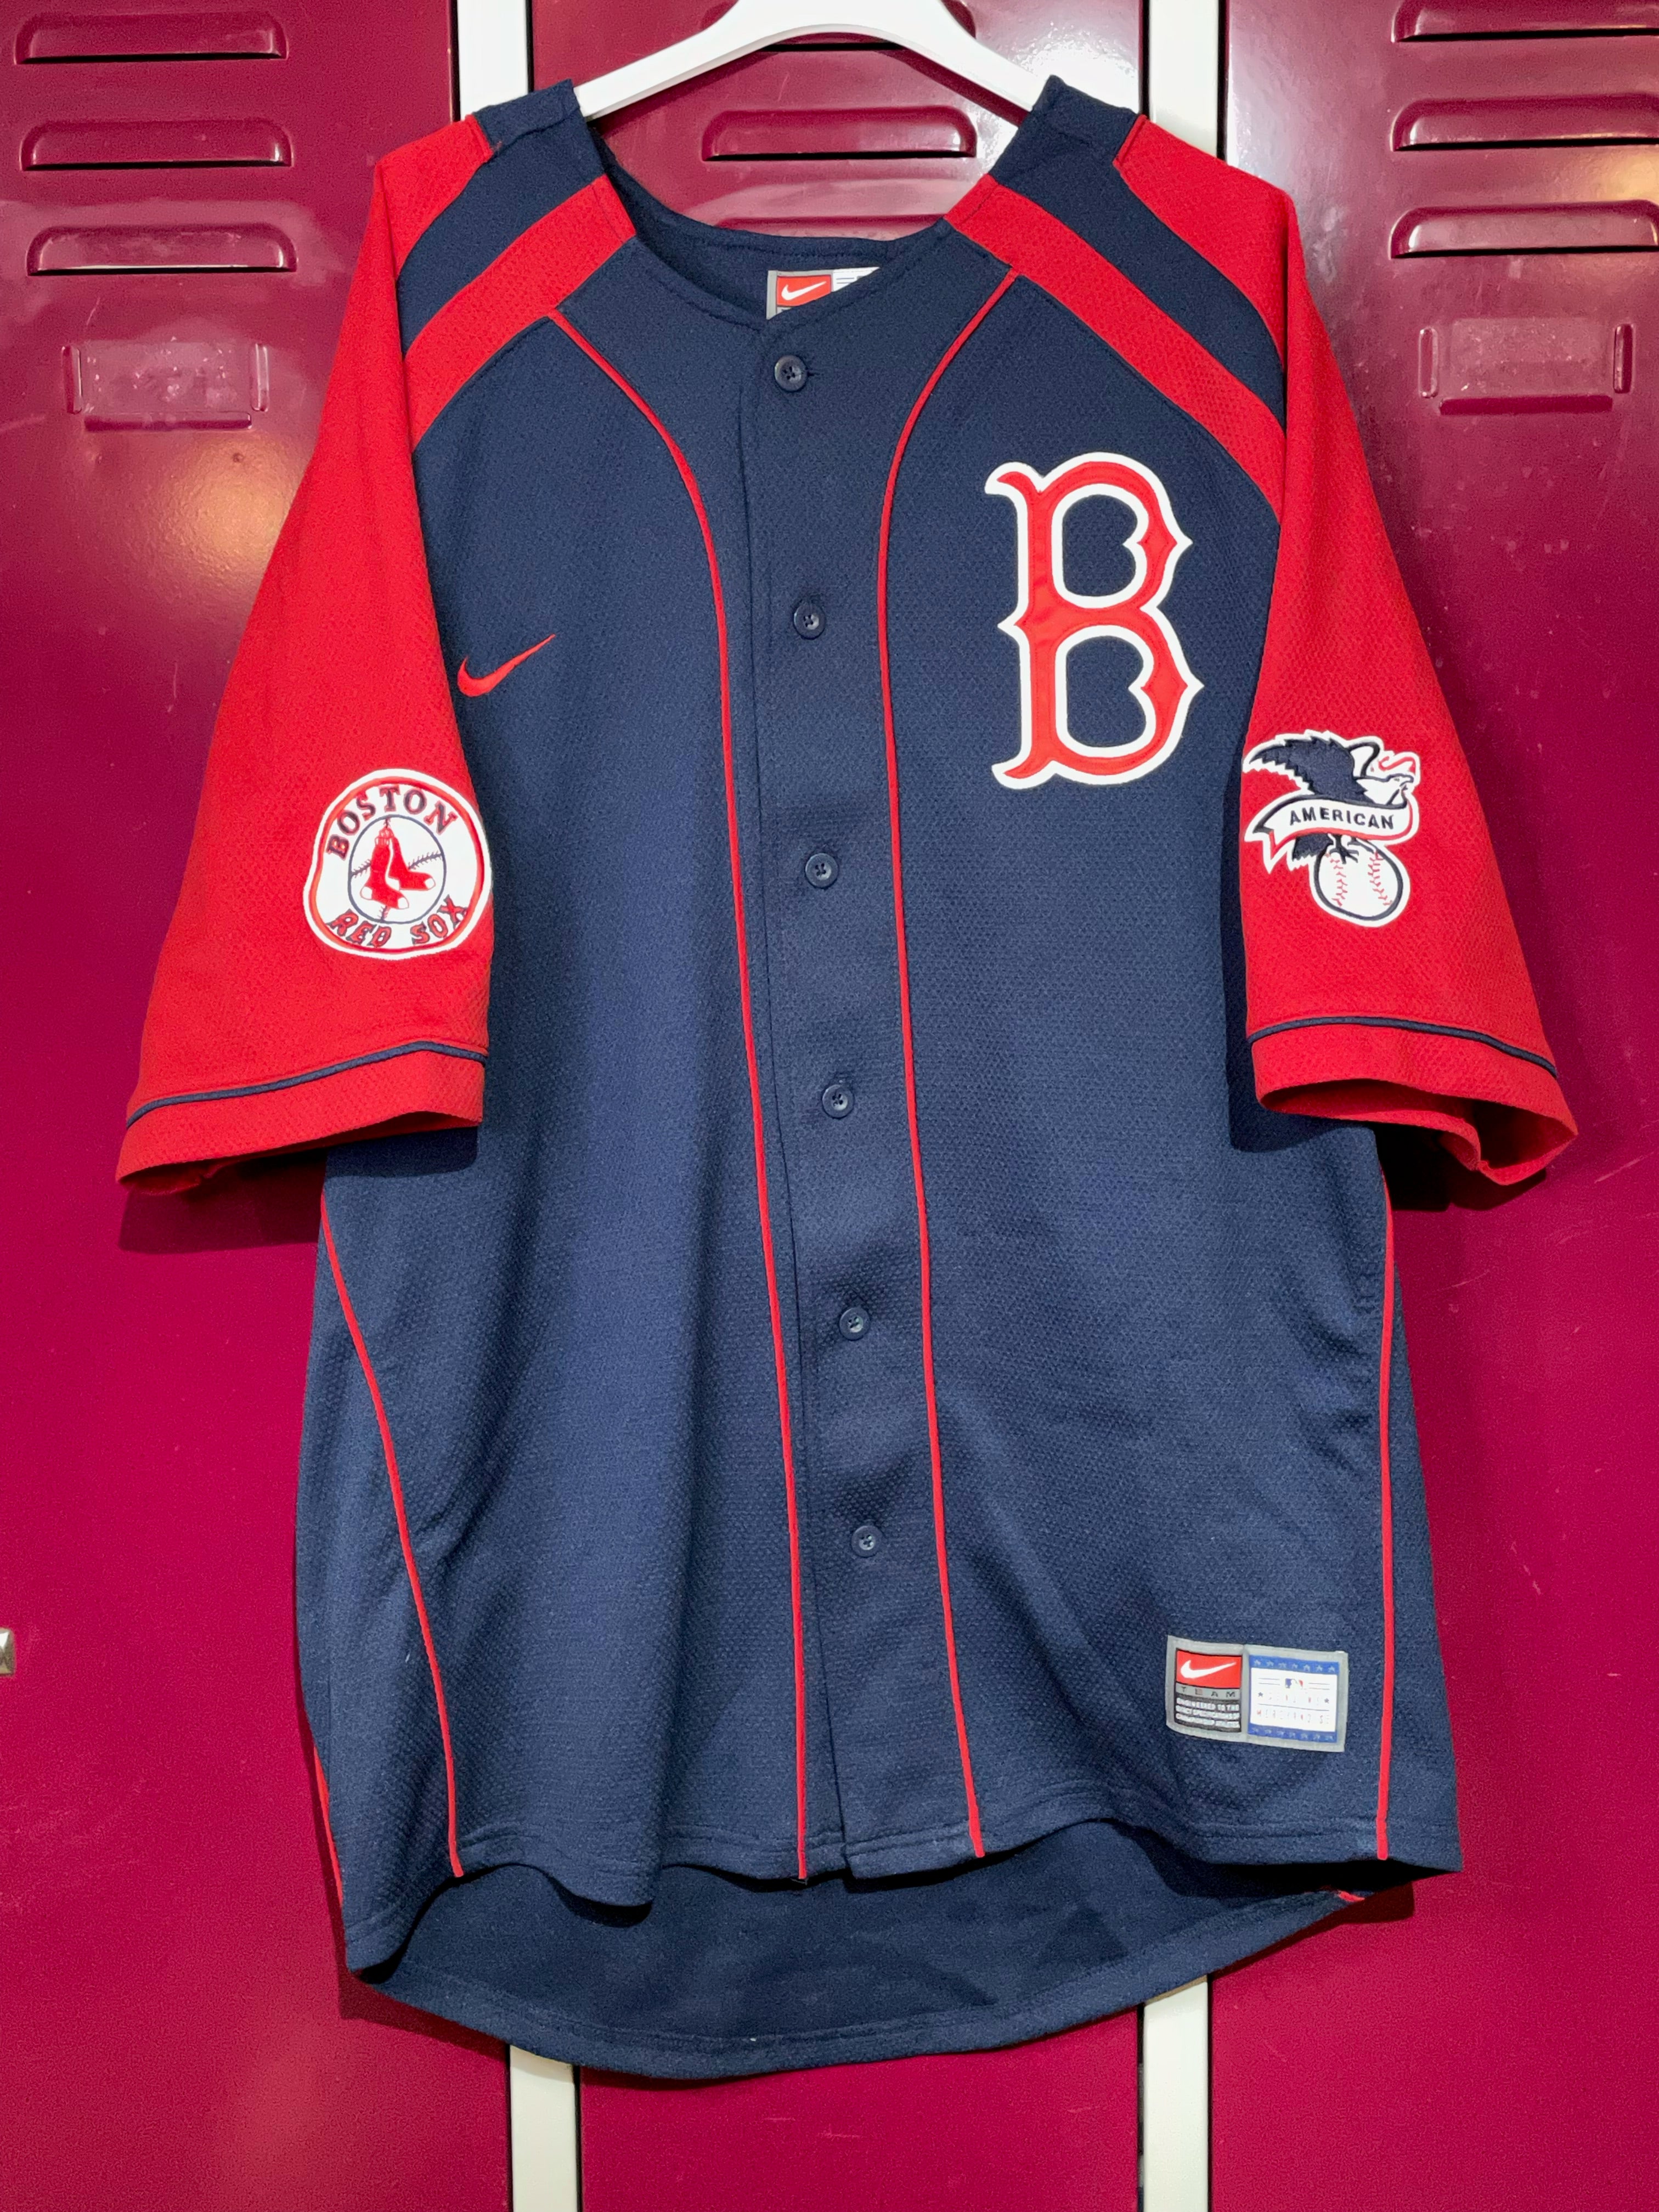 Boston Red Sox T-Shirts in Boston Red Sox Team Shop 